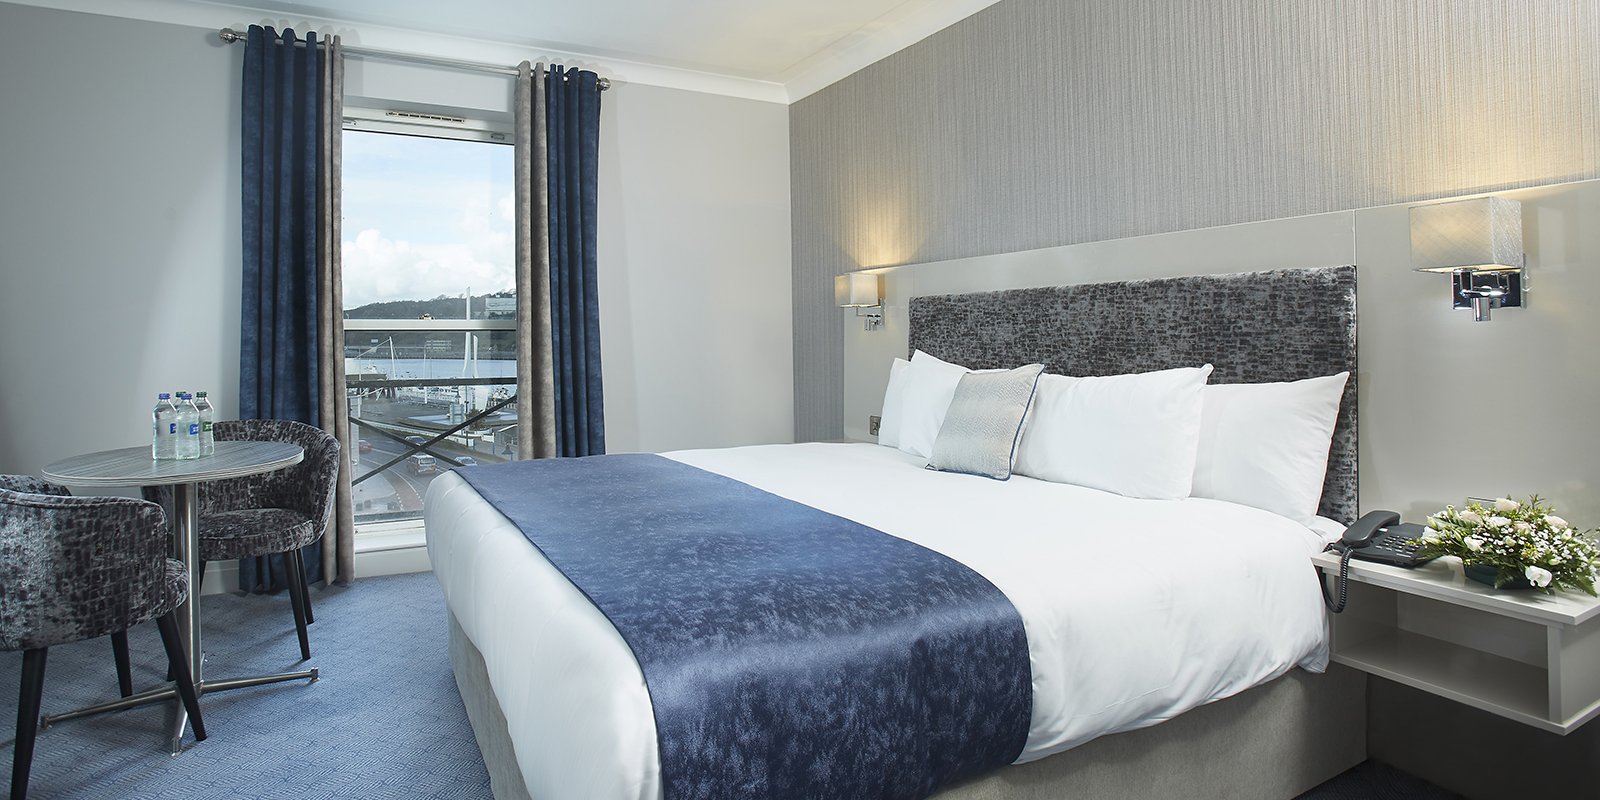 Deluxe king size room www.towerhotelwaterford.com_v4